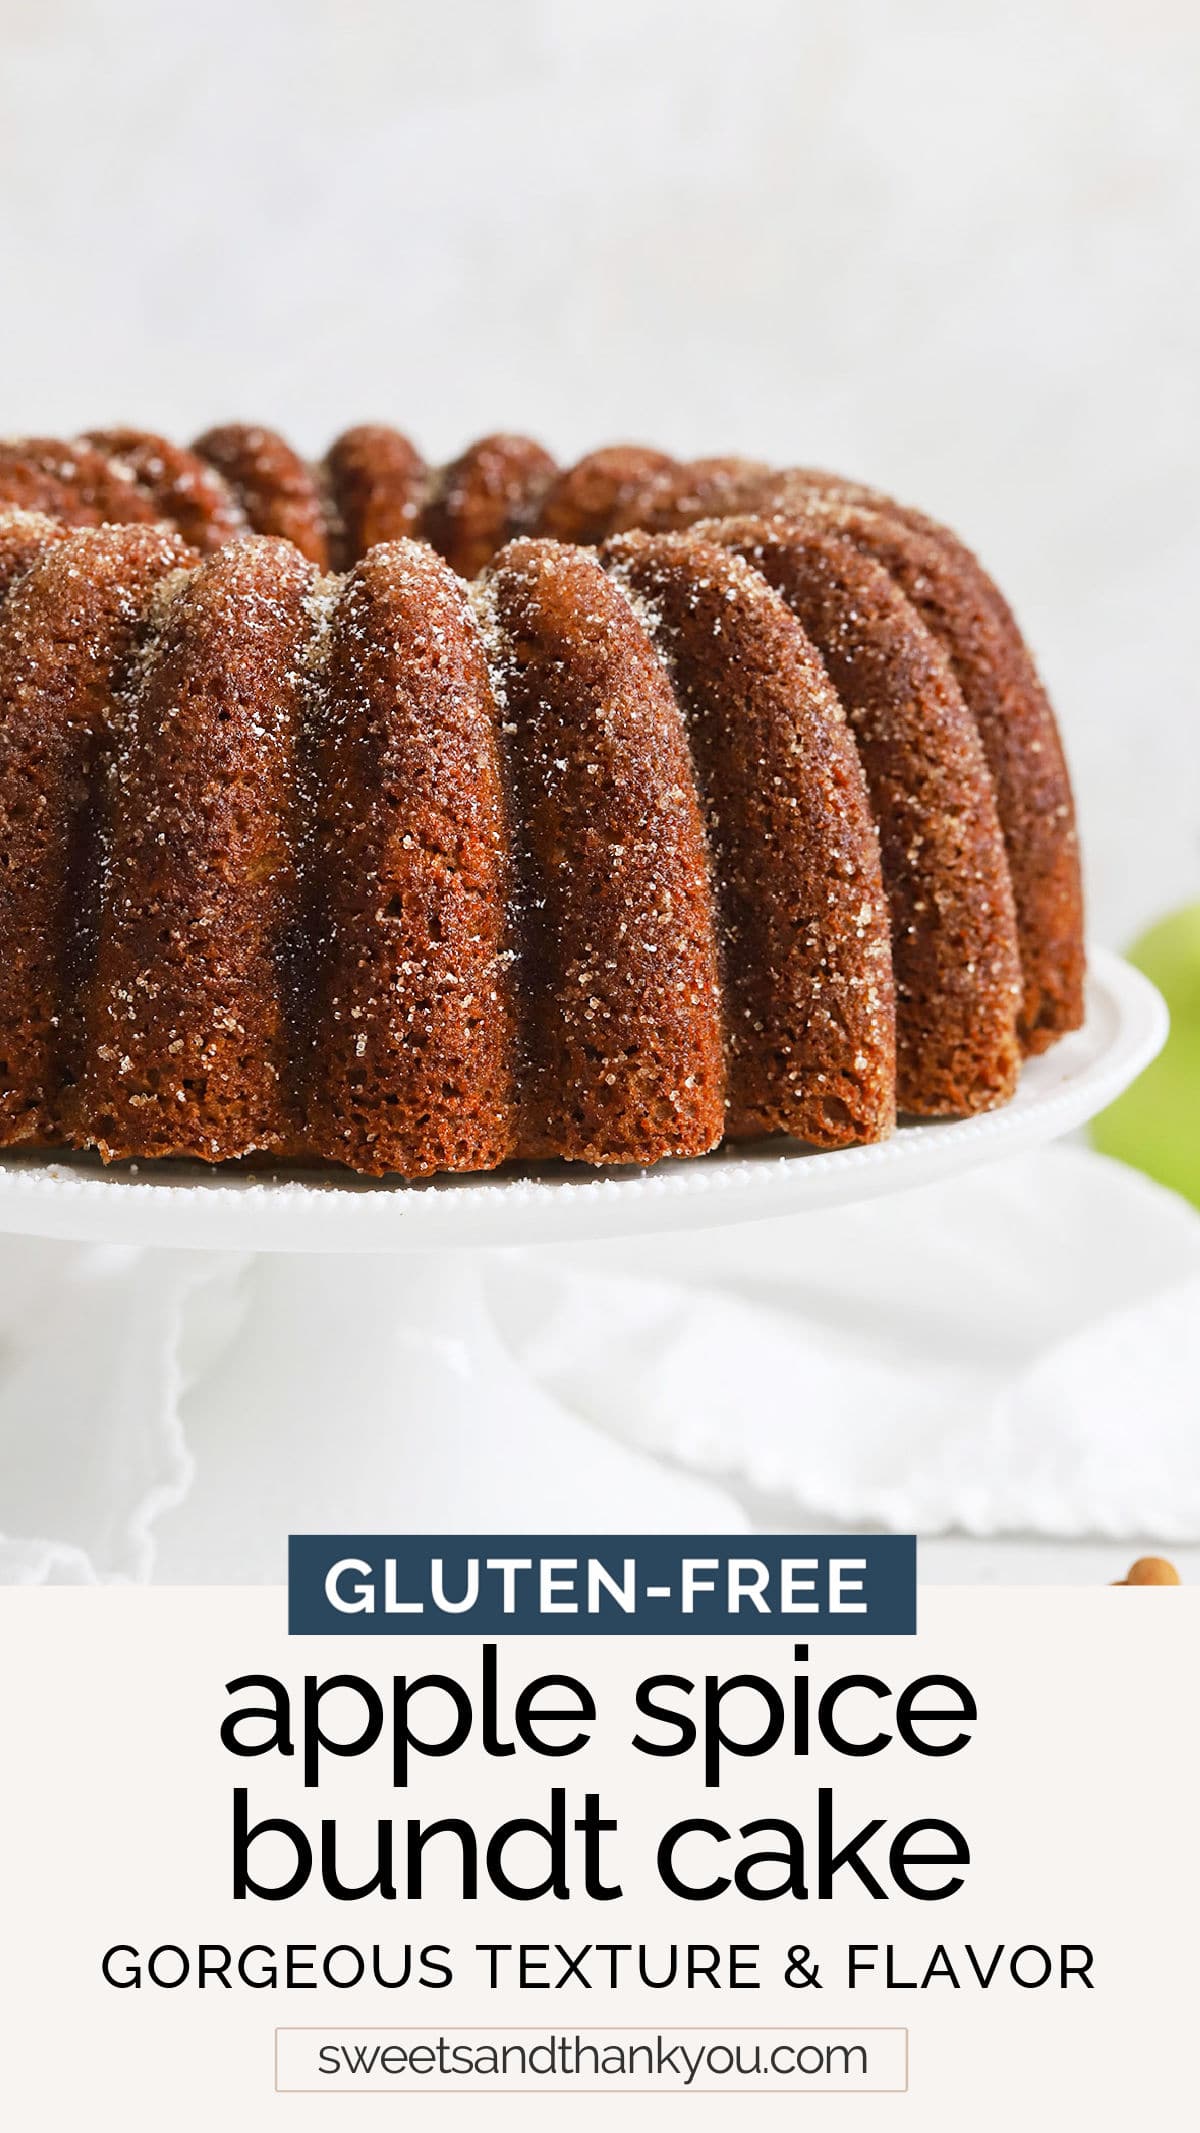 Gluten-Free Apple Spice Bundt Cake. This gluten-free apple bundt cake has warm flavors & gorgeous tender texture. Try it with caramel sauce or cinnamon sugar for a fun finish! / Apple Spice Bundt Cake Recipe / Gluten Free Bundt Cake Recipe / Fall Dessert / Gluten Free Cake / Gluten Free Apple Cake / How to keep bundt cake from sticking / Holiday Dessert / Thanksgiving Dessert / Christmas Dessert / Christmas Cake / Gluten Free Spice Cake // Spice Cake Bundt // Apple Bundt